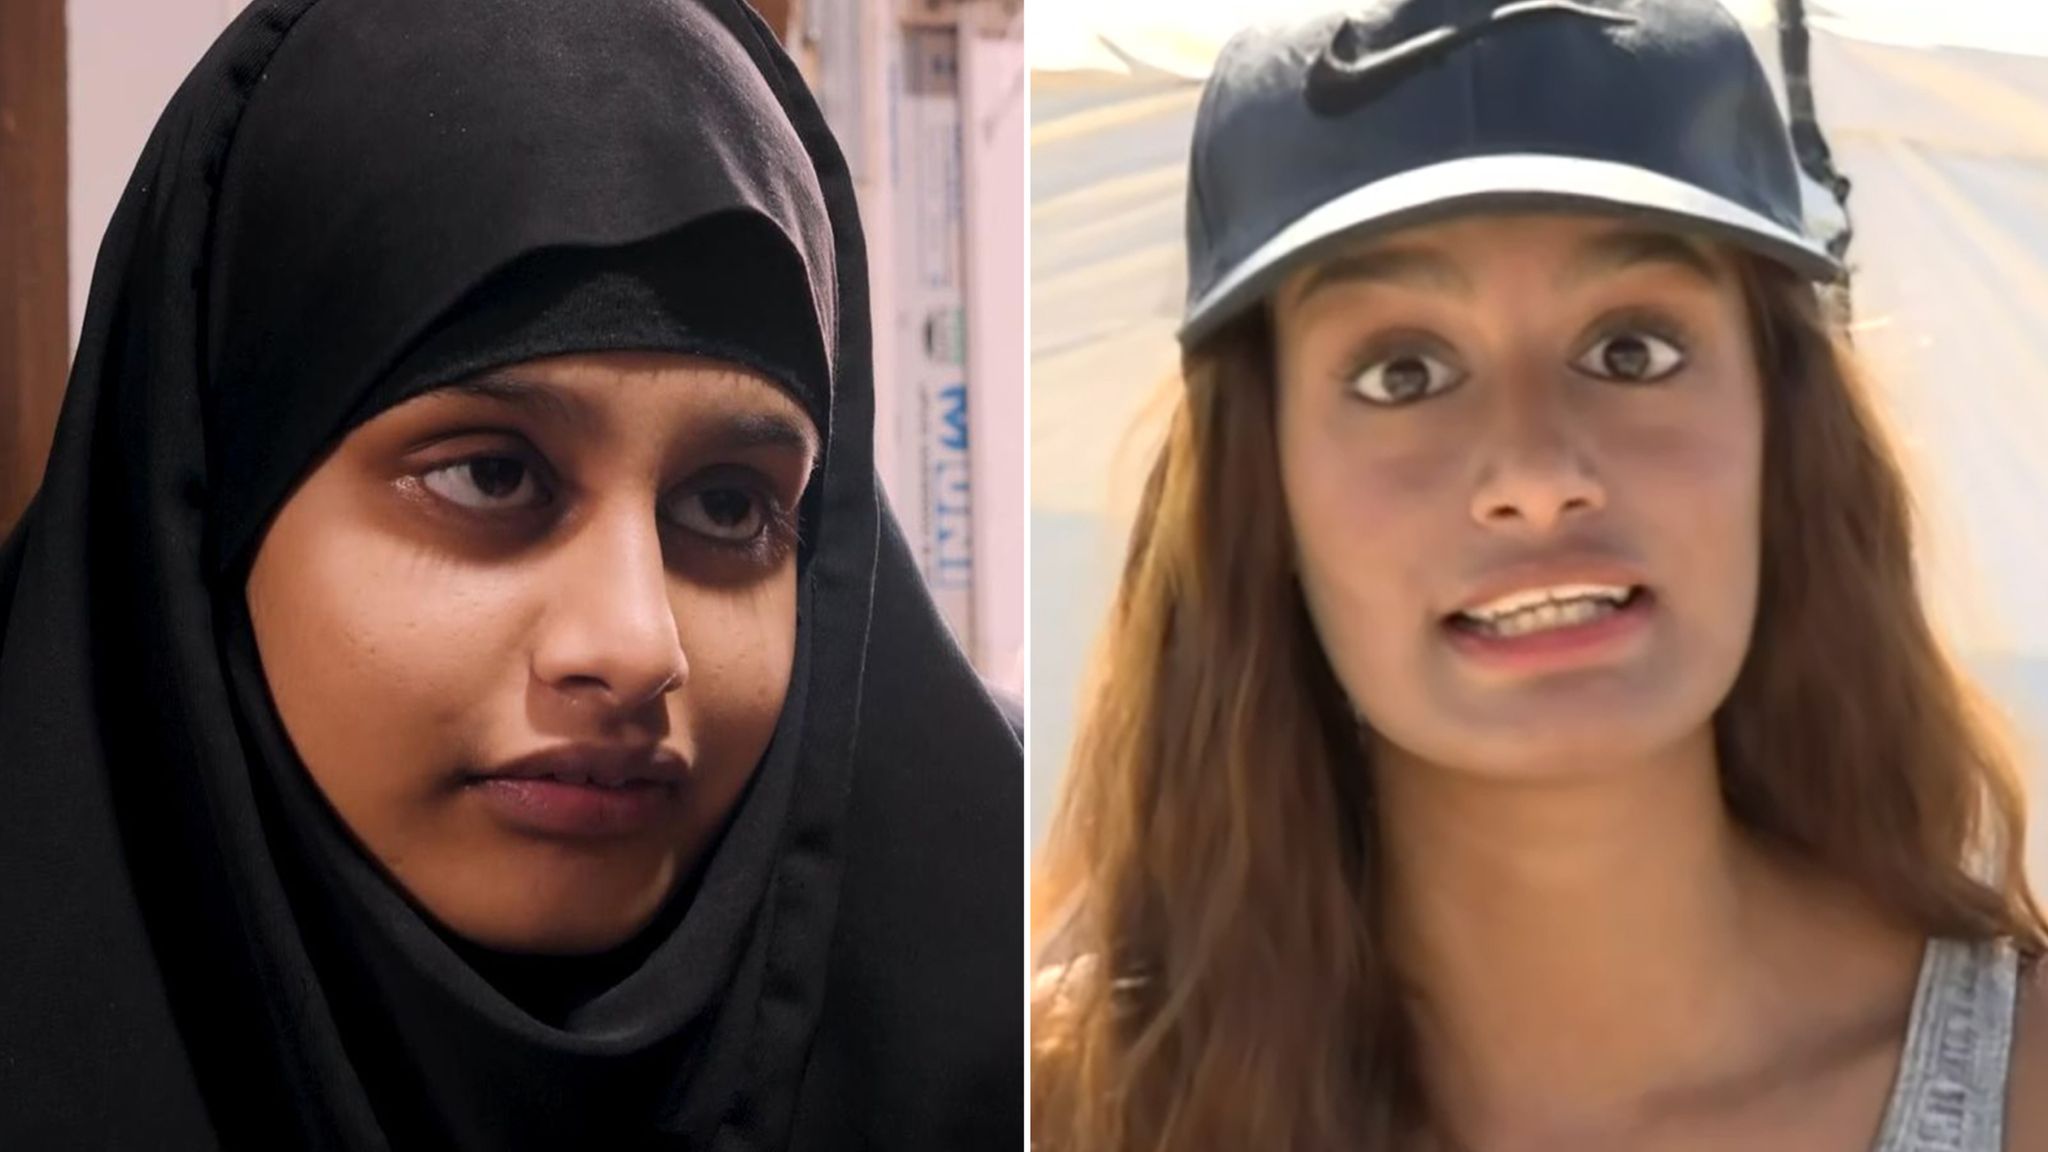 What Shamima Begum’s Case Tells Us About the UK’s Treatment of Muslim Women